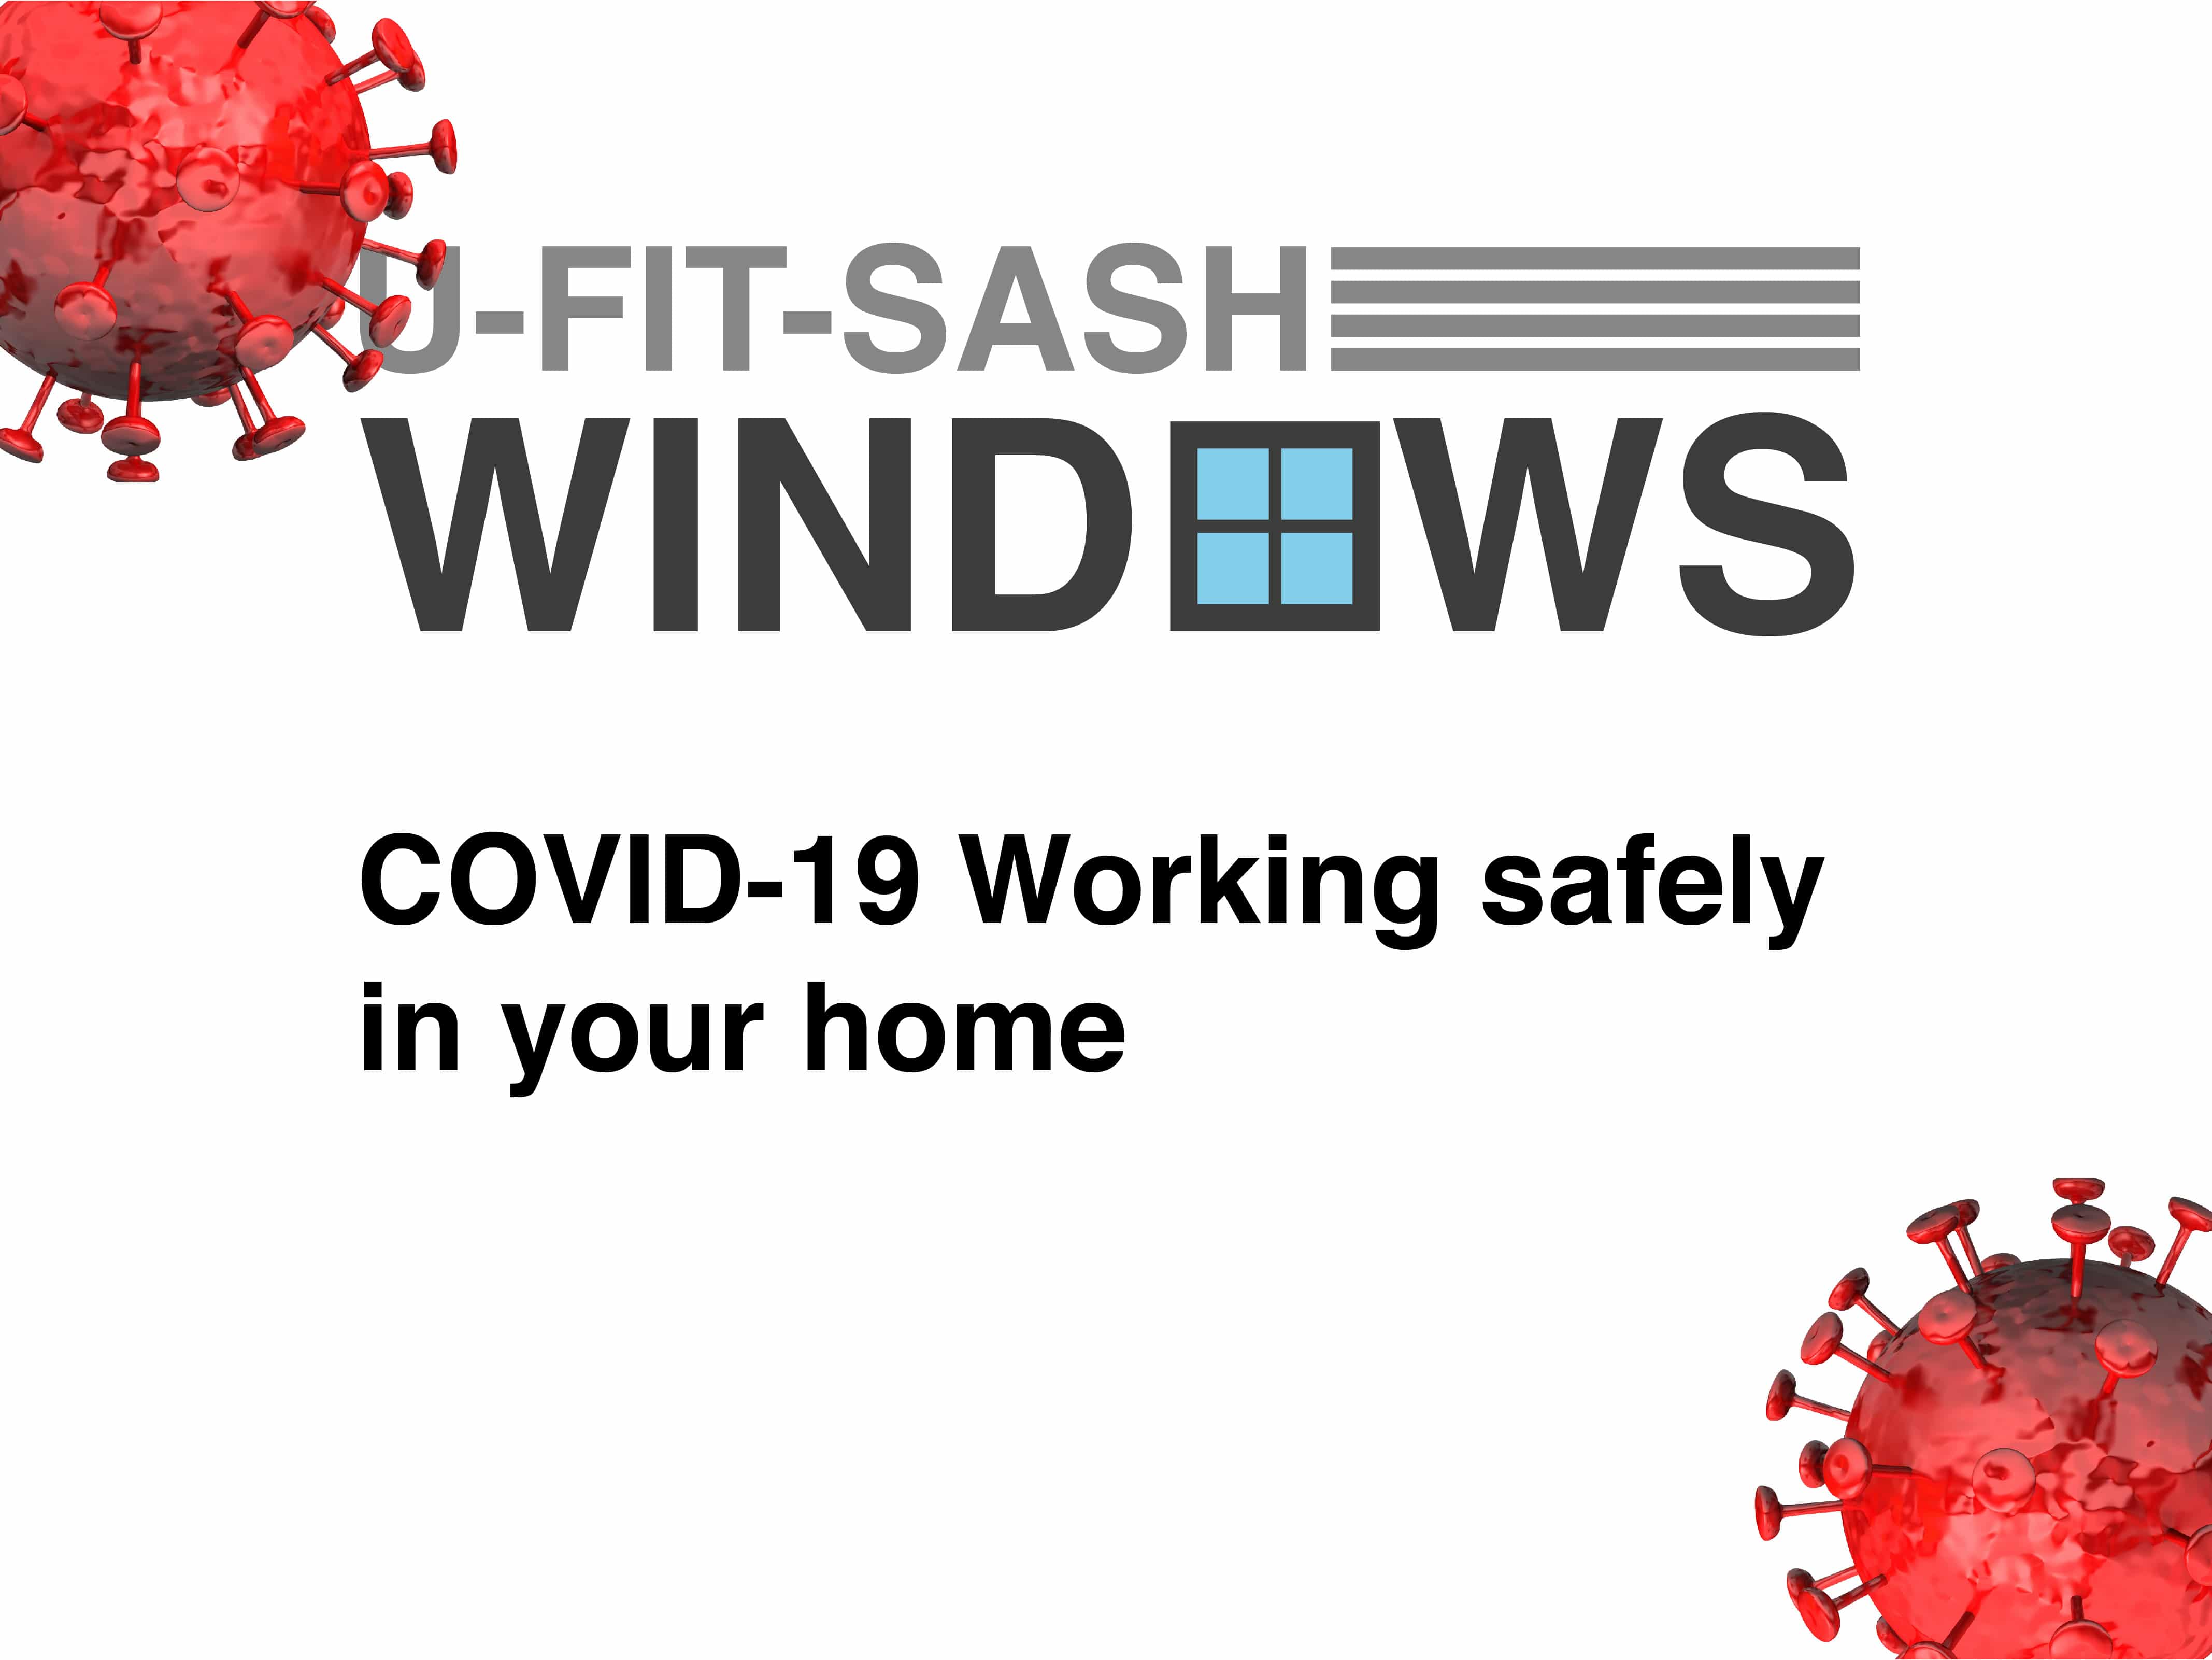 COVID-19 Working safely in your home